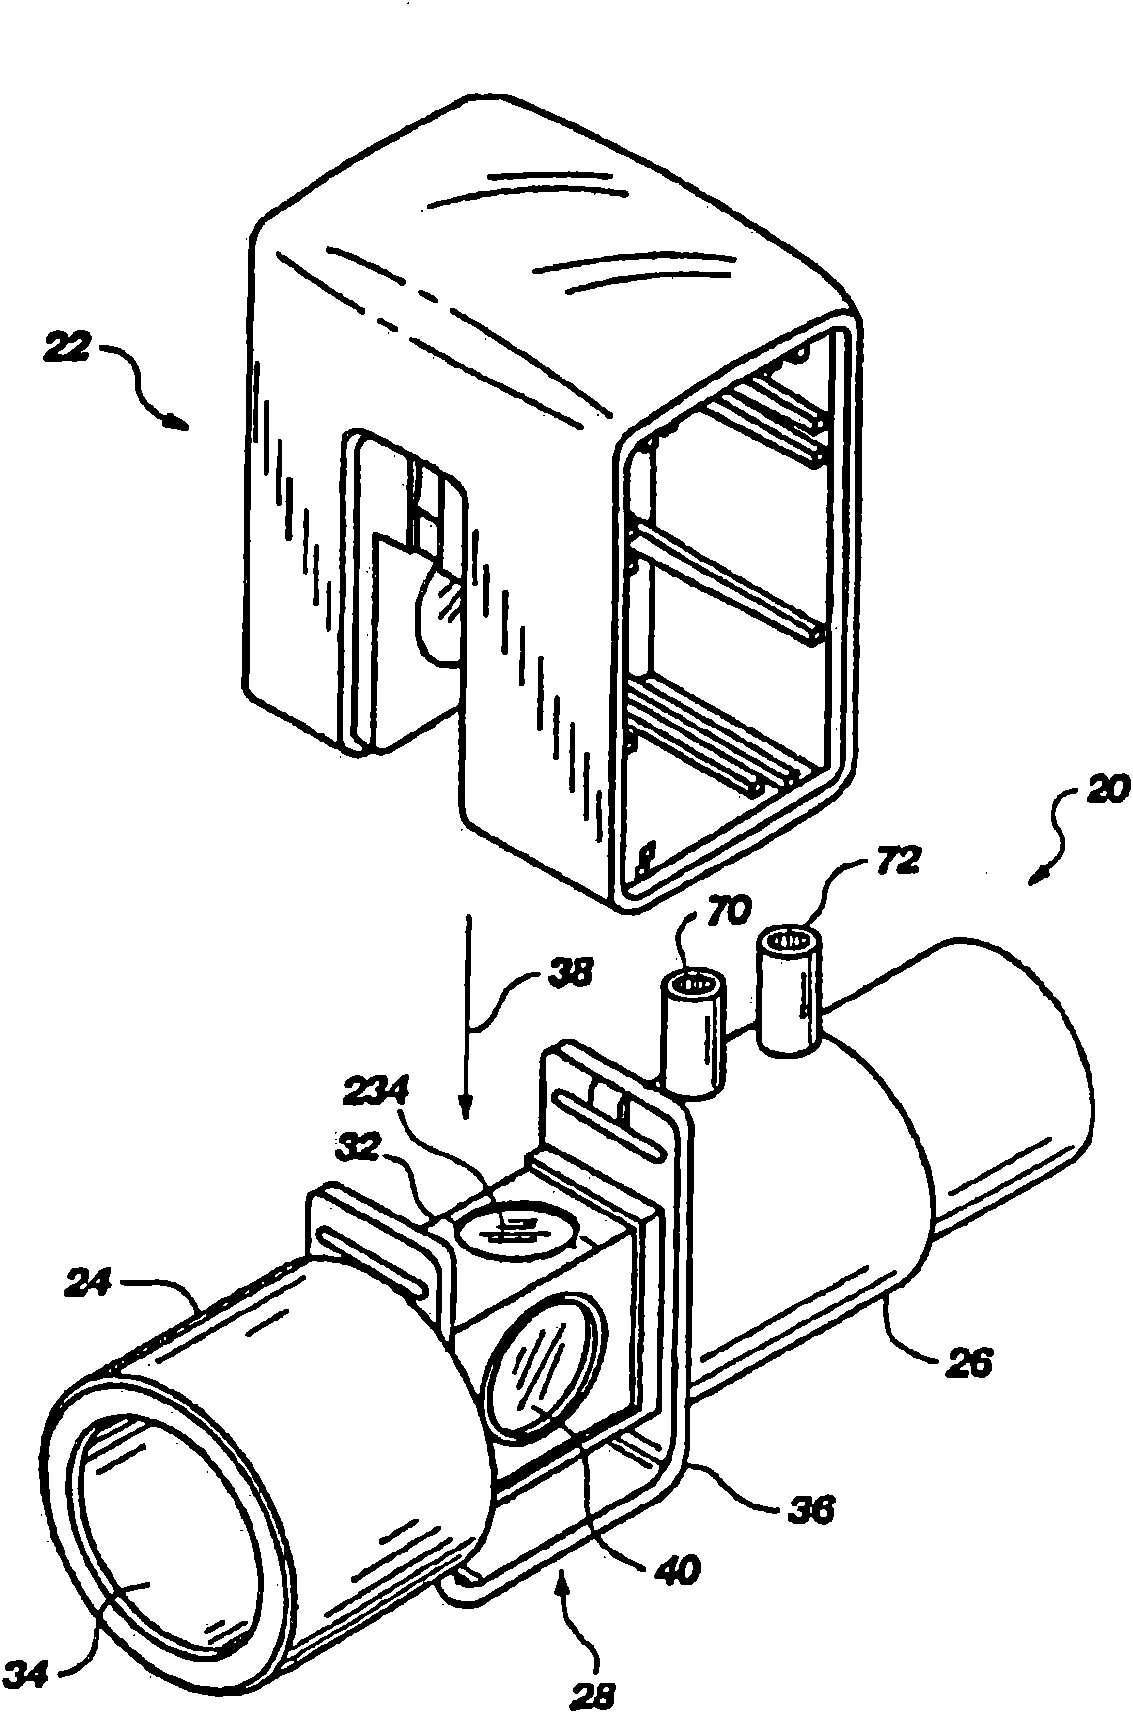 Metabolic measurement system including a multiple function airway adapter